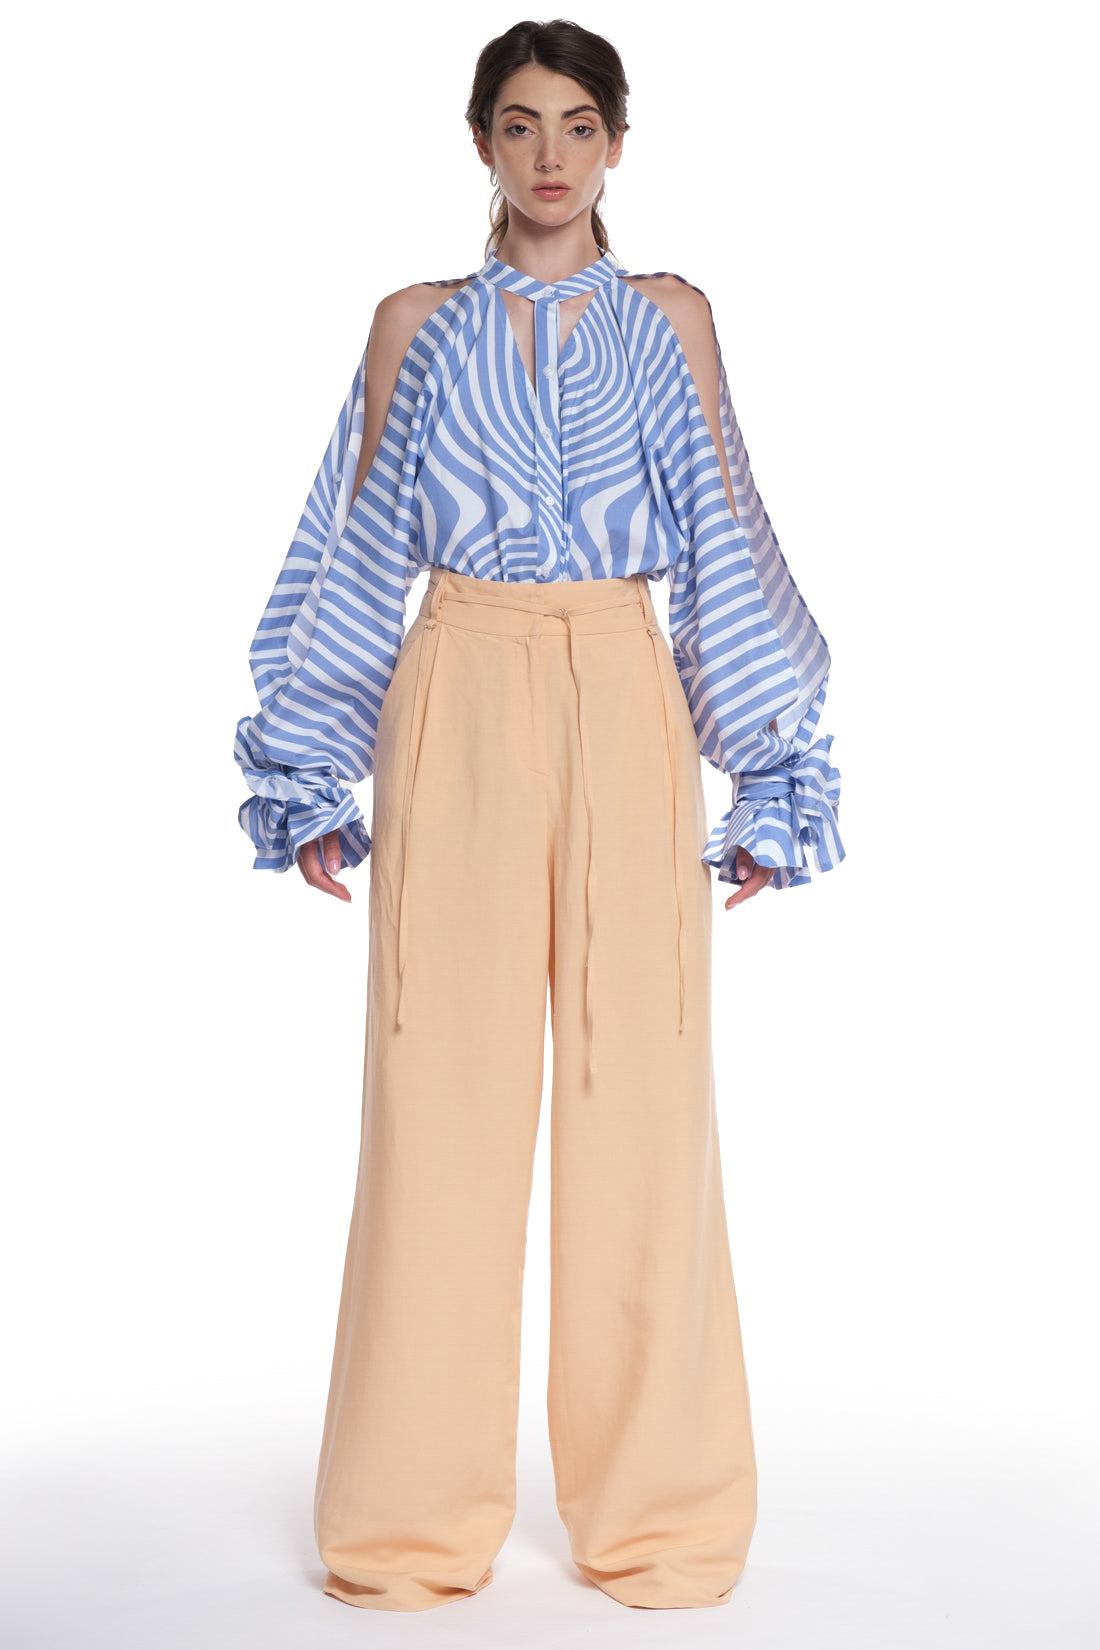 LONG HIGH-WAISTED PANTS WITH THIN BELT AND DETAILS IN FRONT